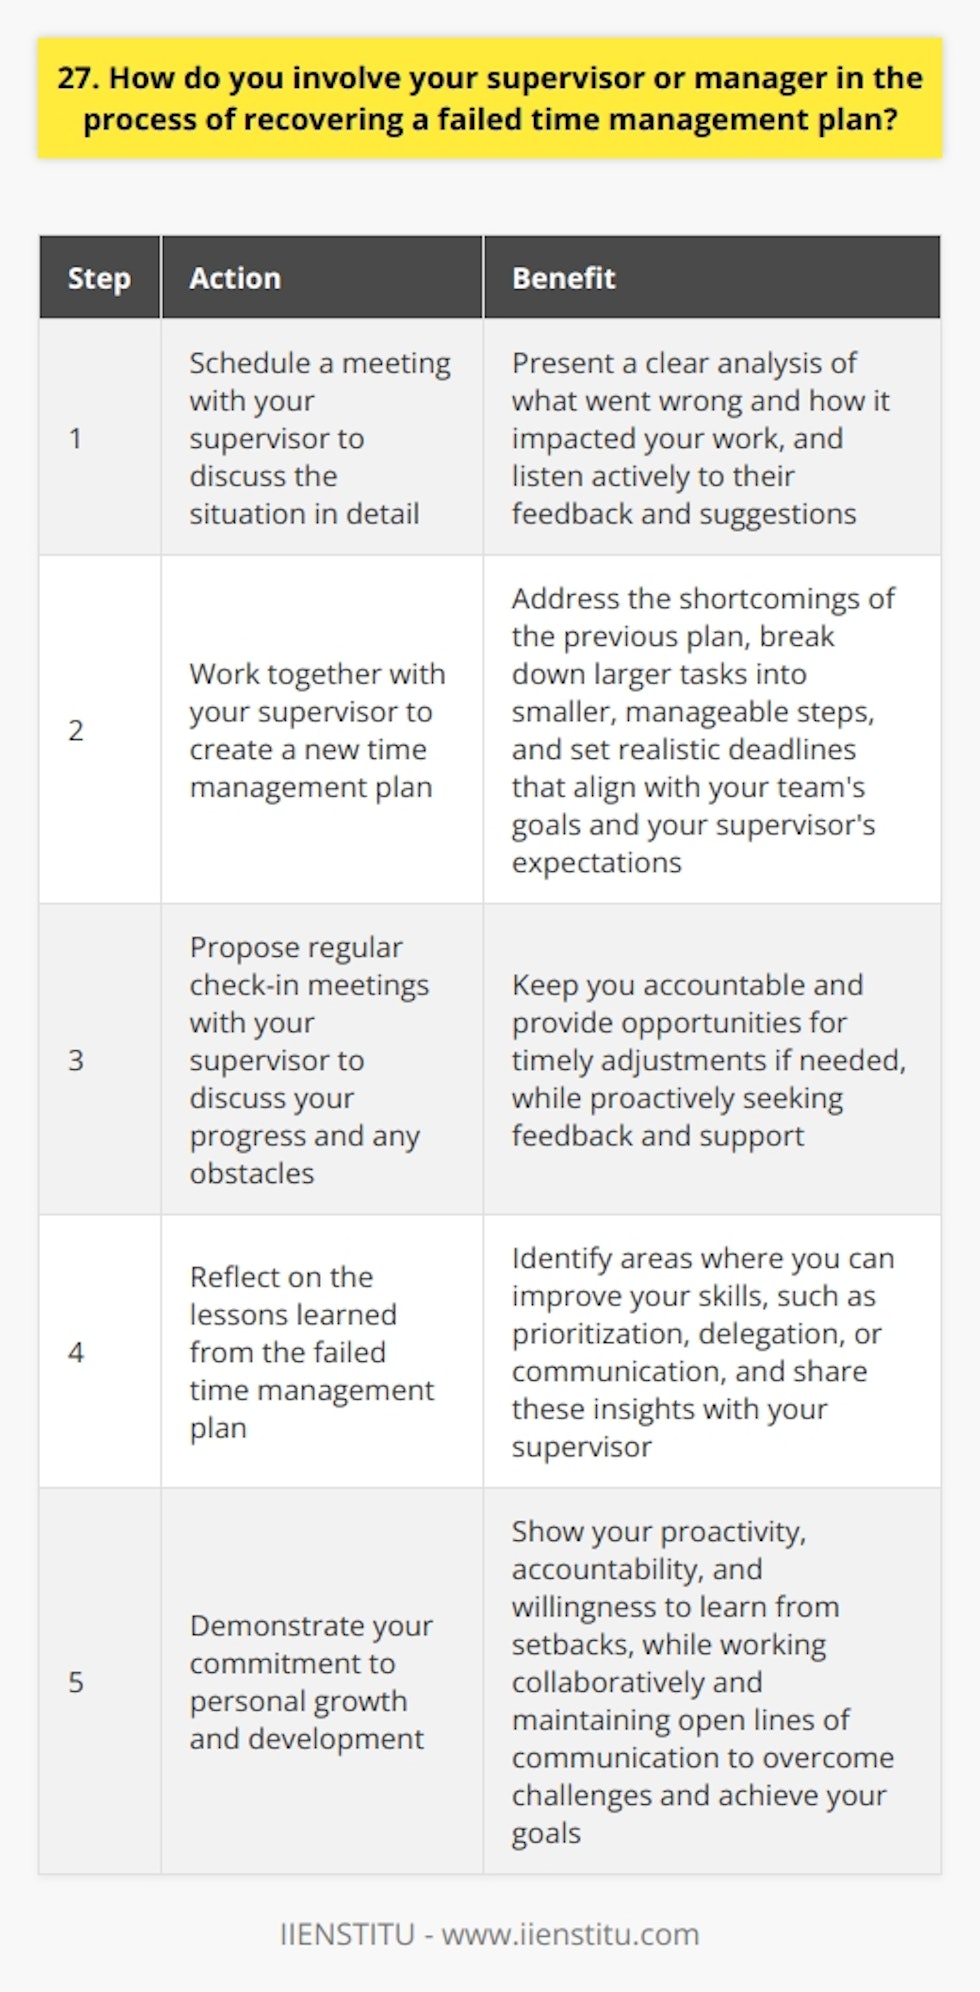 When a time management plan fails, its crucial to involve your supervisor or manager in the recovery process. Openly communicate the challenges youve encountered and the steps youve taken to address them. Seek their guidance and support in identifying the root causes of the failure and developing a revised plan. Collaborating with Your Supervisor Schedule a meeting with your supervisor to discuss the situation in detail. Be prepared to present a clear analysis of what went wrong and how it impacted your work. Listen actively to their feedback and suggestions, as they may provide valuable insights based on their experience and broader perspective. Developing a New Plan Work together with your supervisor to create a new time management plan that addresses the shortcomings of the previous one. Break down larger tasks into smaller, manageable steps and set realistic deadlines. Ensure that the revised plan aligns with your teams goals and your supervisors expectations. Regular Check-ins and Progress Updates Propose regular check-in meetings with your supervisor to discuss your progress and any obstacles you encounter along the way. These meetings will help keep you accountable and provide opportunities for timely adjustments if needed. Be proactive in seeking feedback and support throughout the process. Learning from the Experience Reflect on the lessons learned from the failed time management plan. Identify areas where you can improve your skills, such as prioritization, delegation, or communication. Share these insights with your supervisor and demonstrate your commitment to personal growth and development. Remember, involving your supervisor in the recovery process shows your proactivity, accountability, and willingness to learn from setbacks. By working collaboratively and maintaining open lines of communication, you can overcome the challenges and get back on track towards achieving your goals.